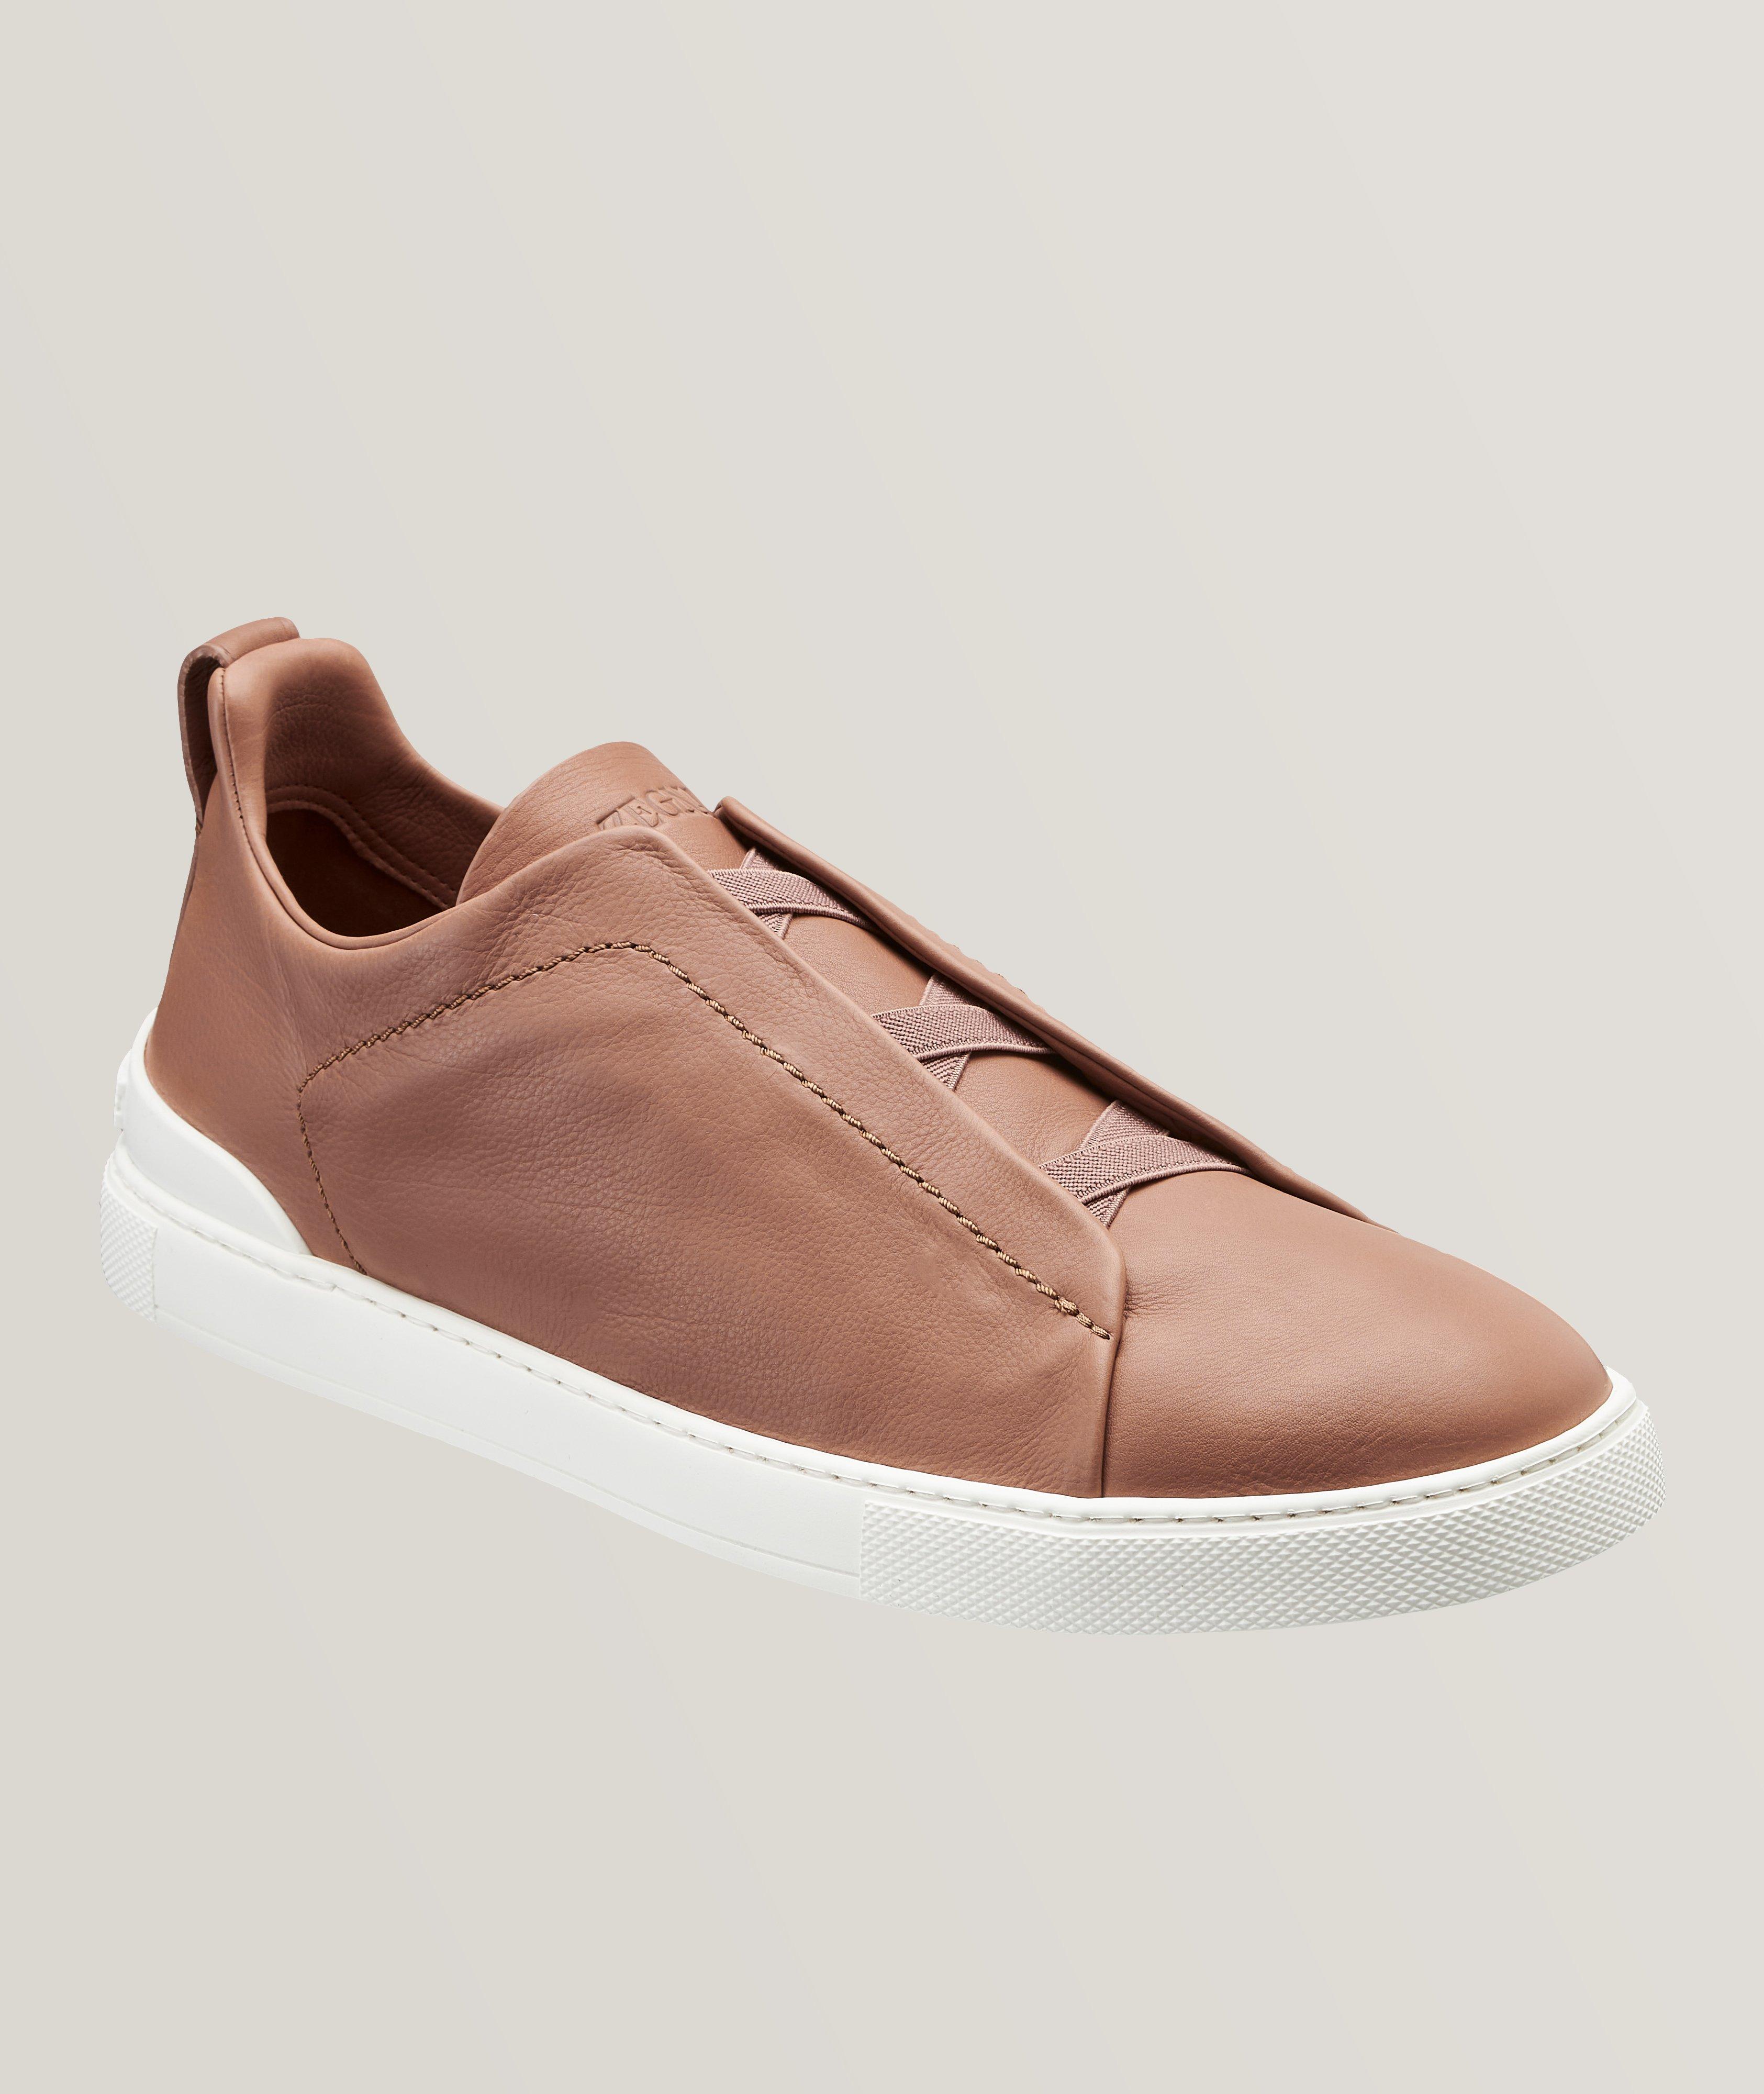 Leather Triple Stitch Sneakers image 0